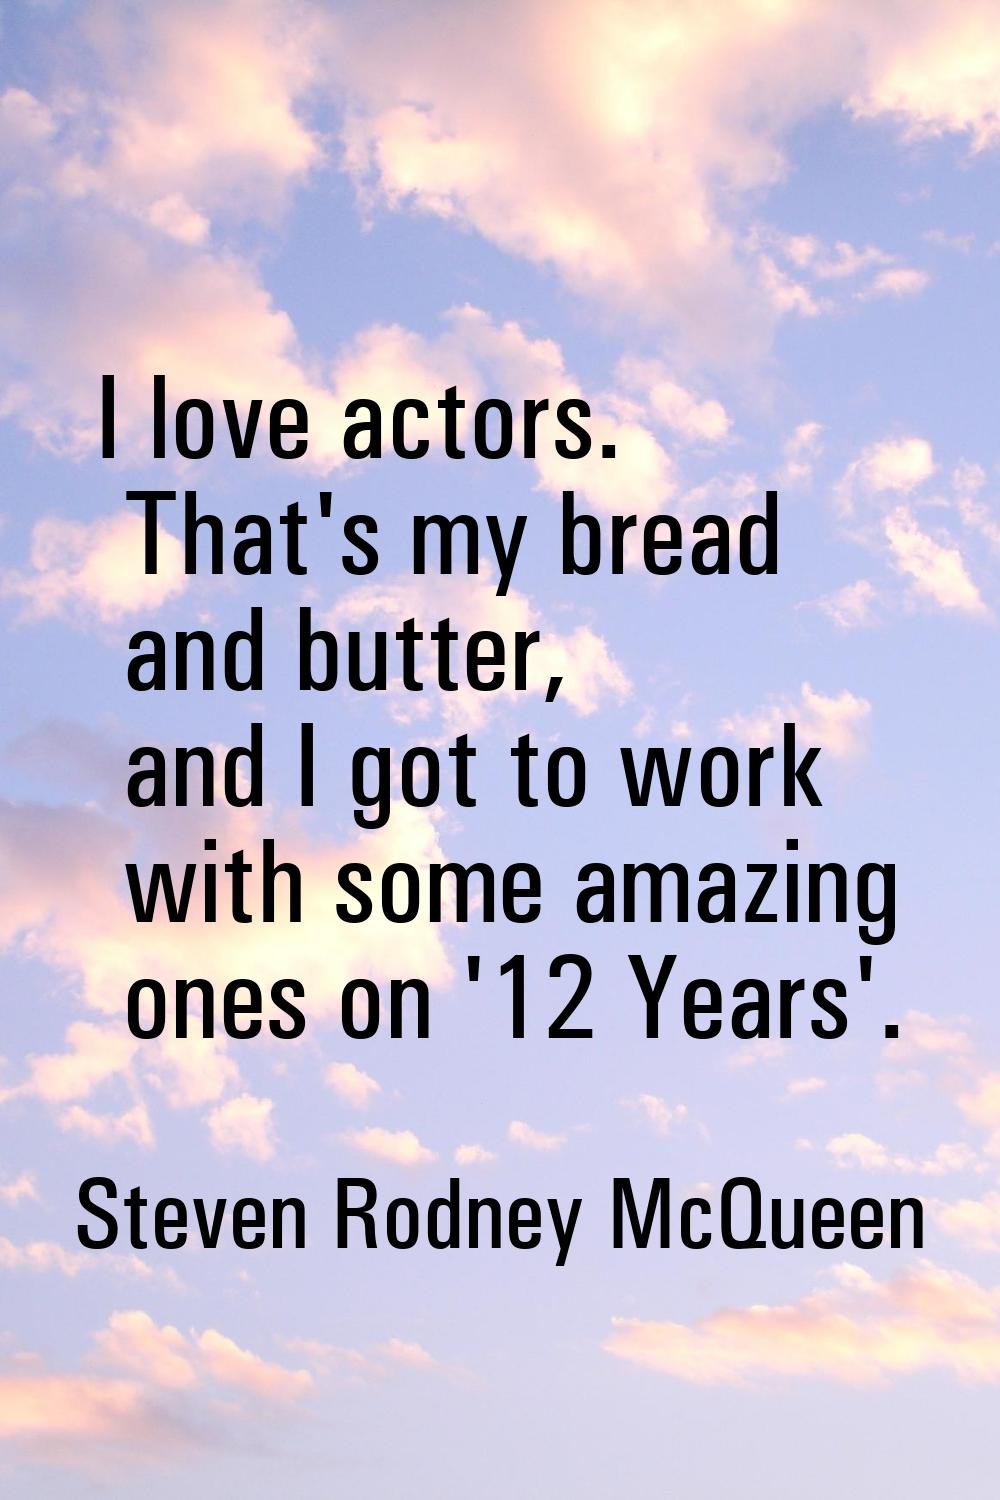 I love actors. That's my bread and butter, and I got to work with some amazing ones on '12 Years'.